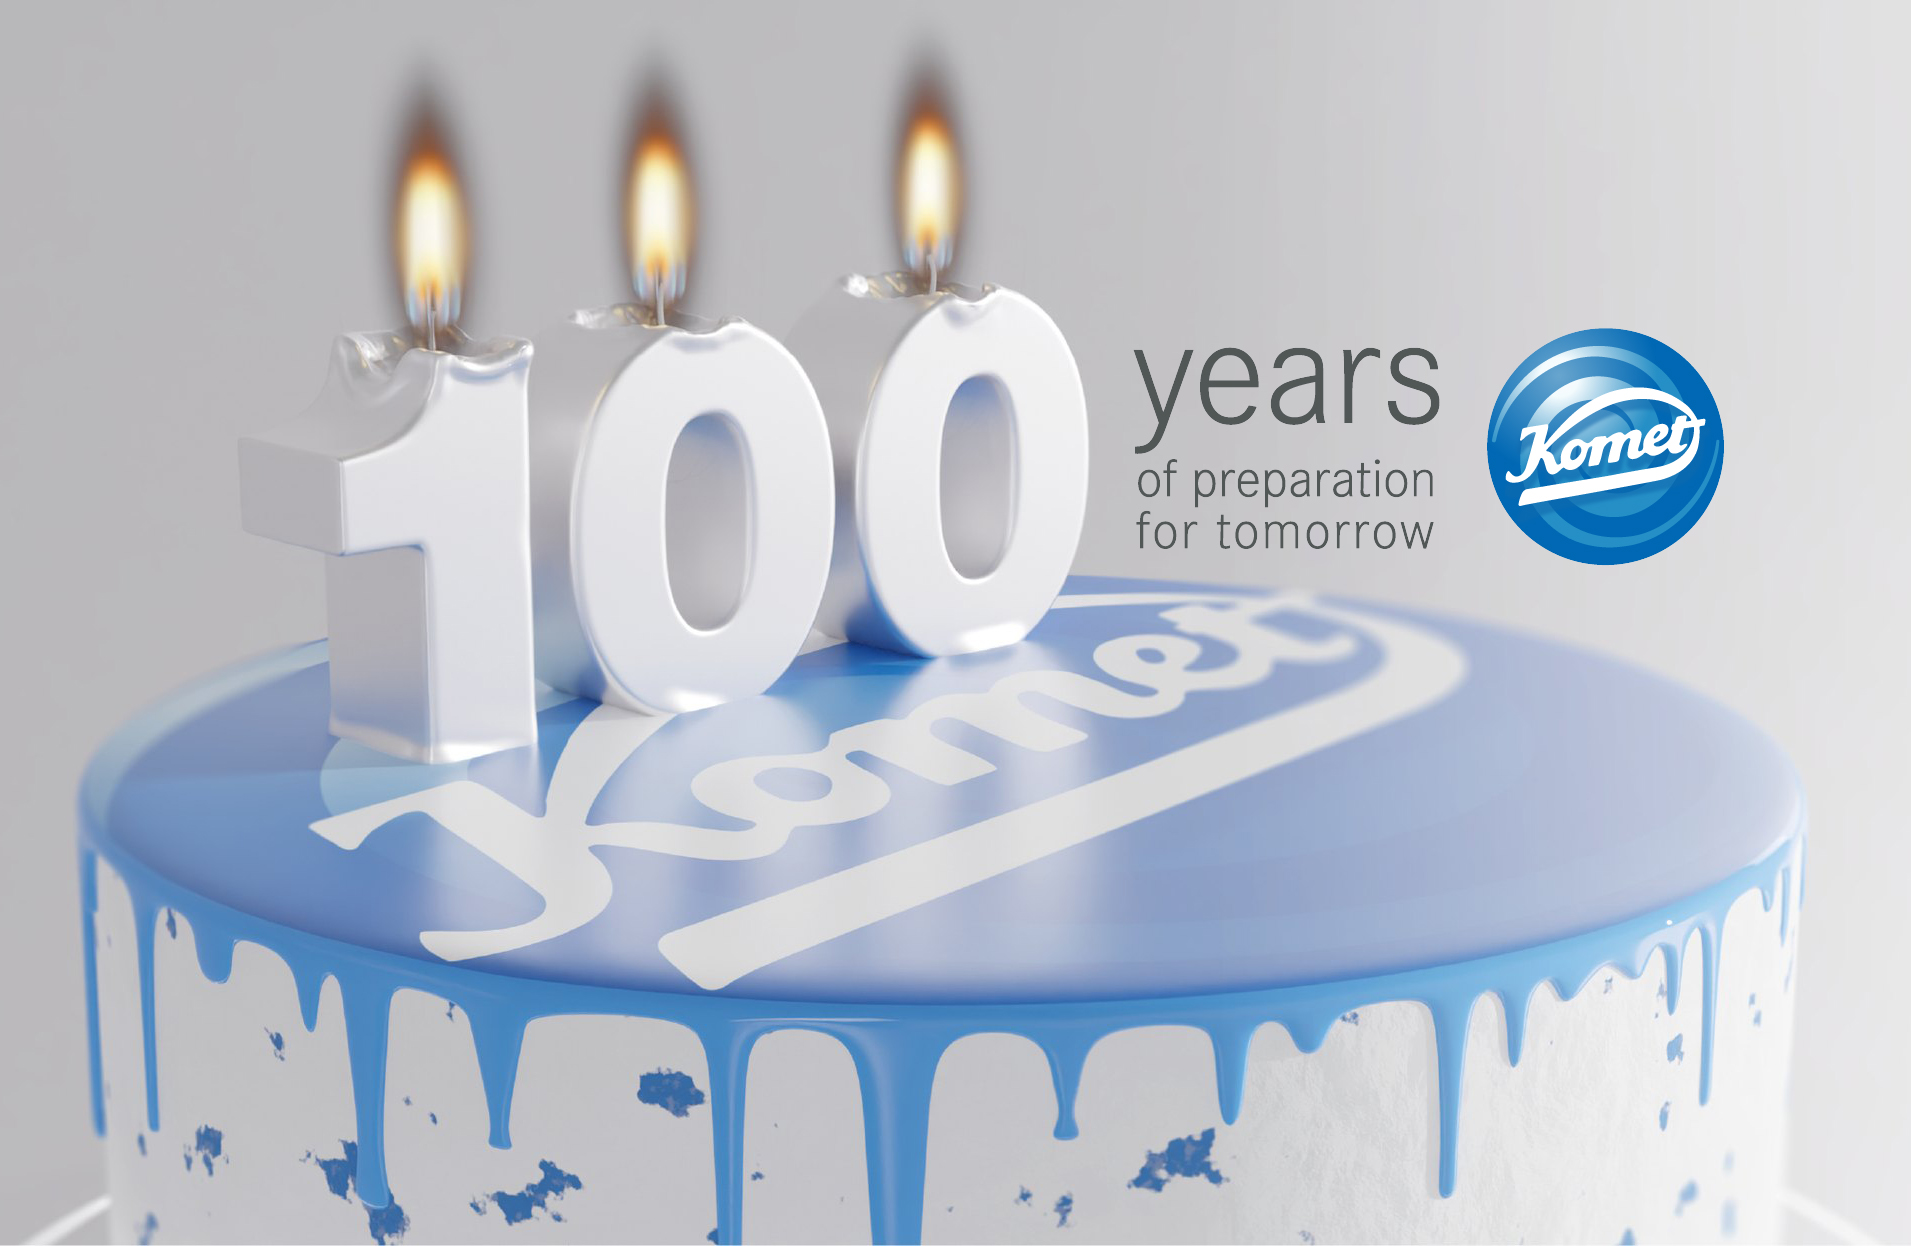 100 years with Komet